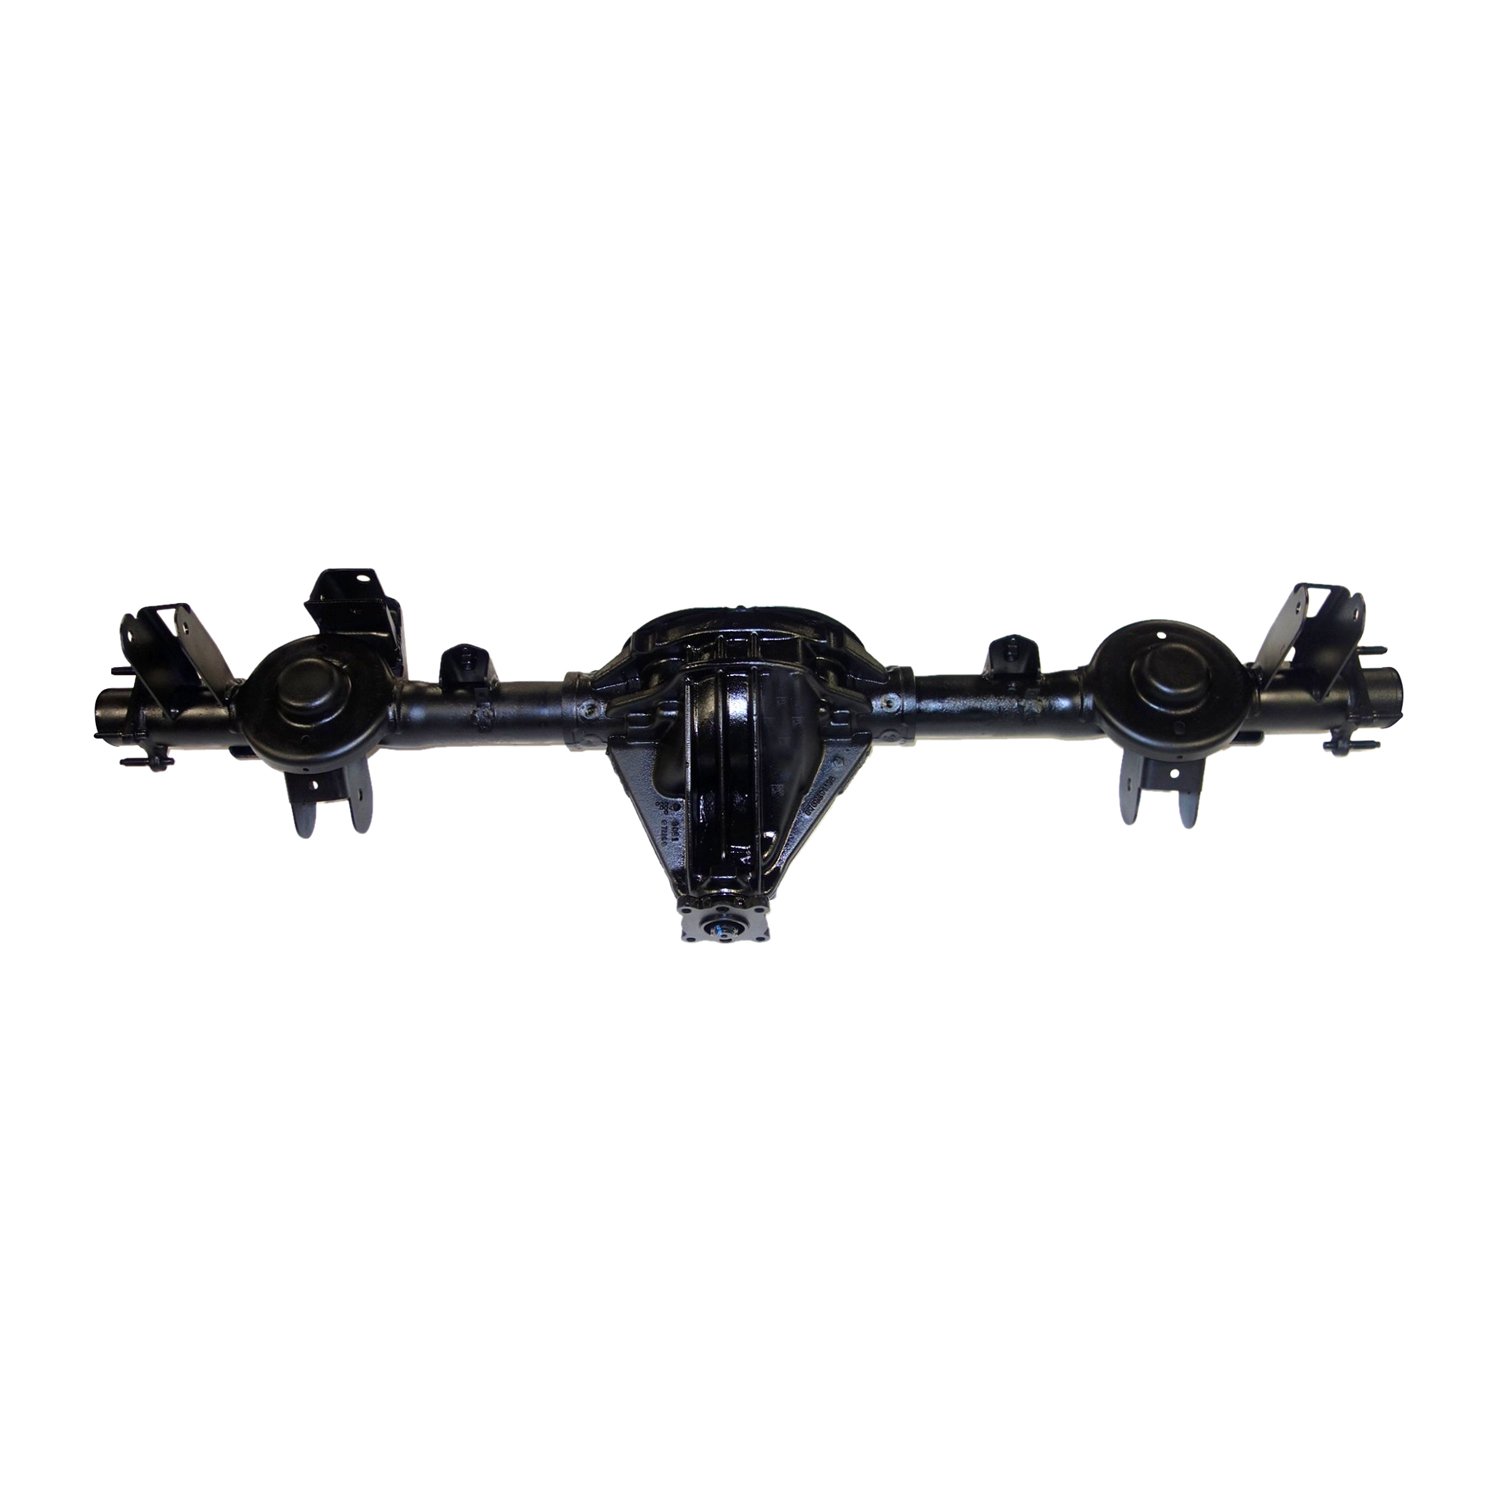 Remanufactured Axle Chy 8.25" 2003 Liberty 3.73 , 3.7l w/o ABS, U/Joint Driveshaft, Posi